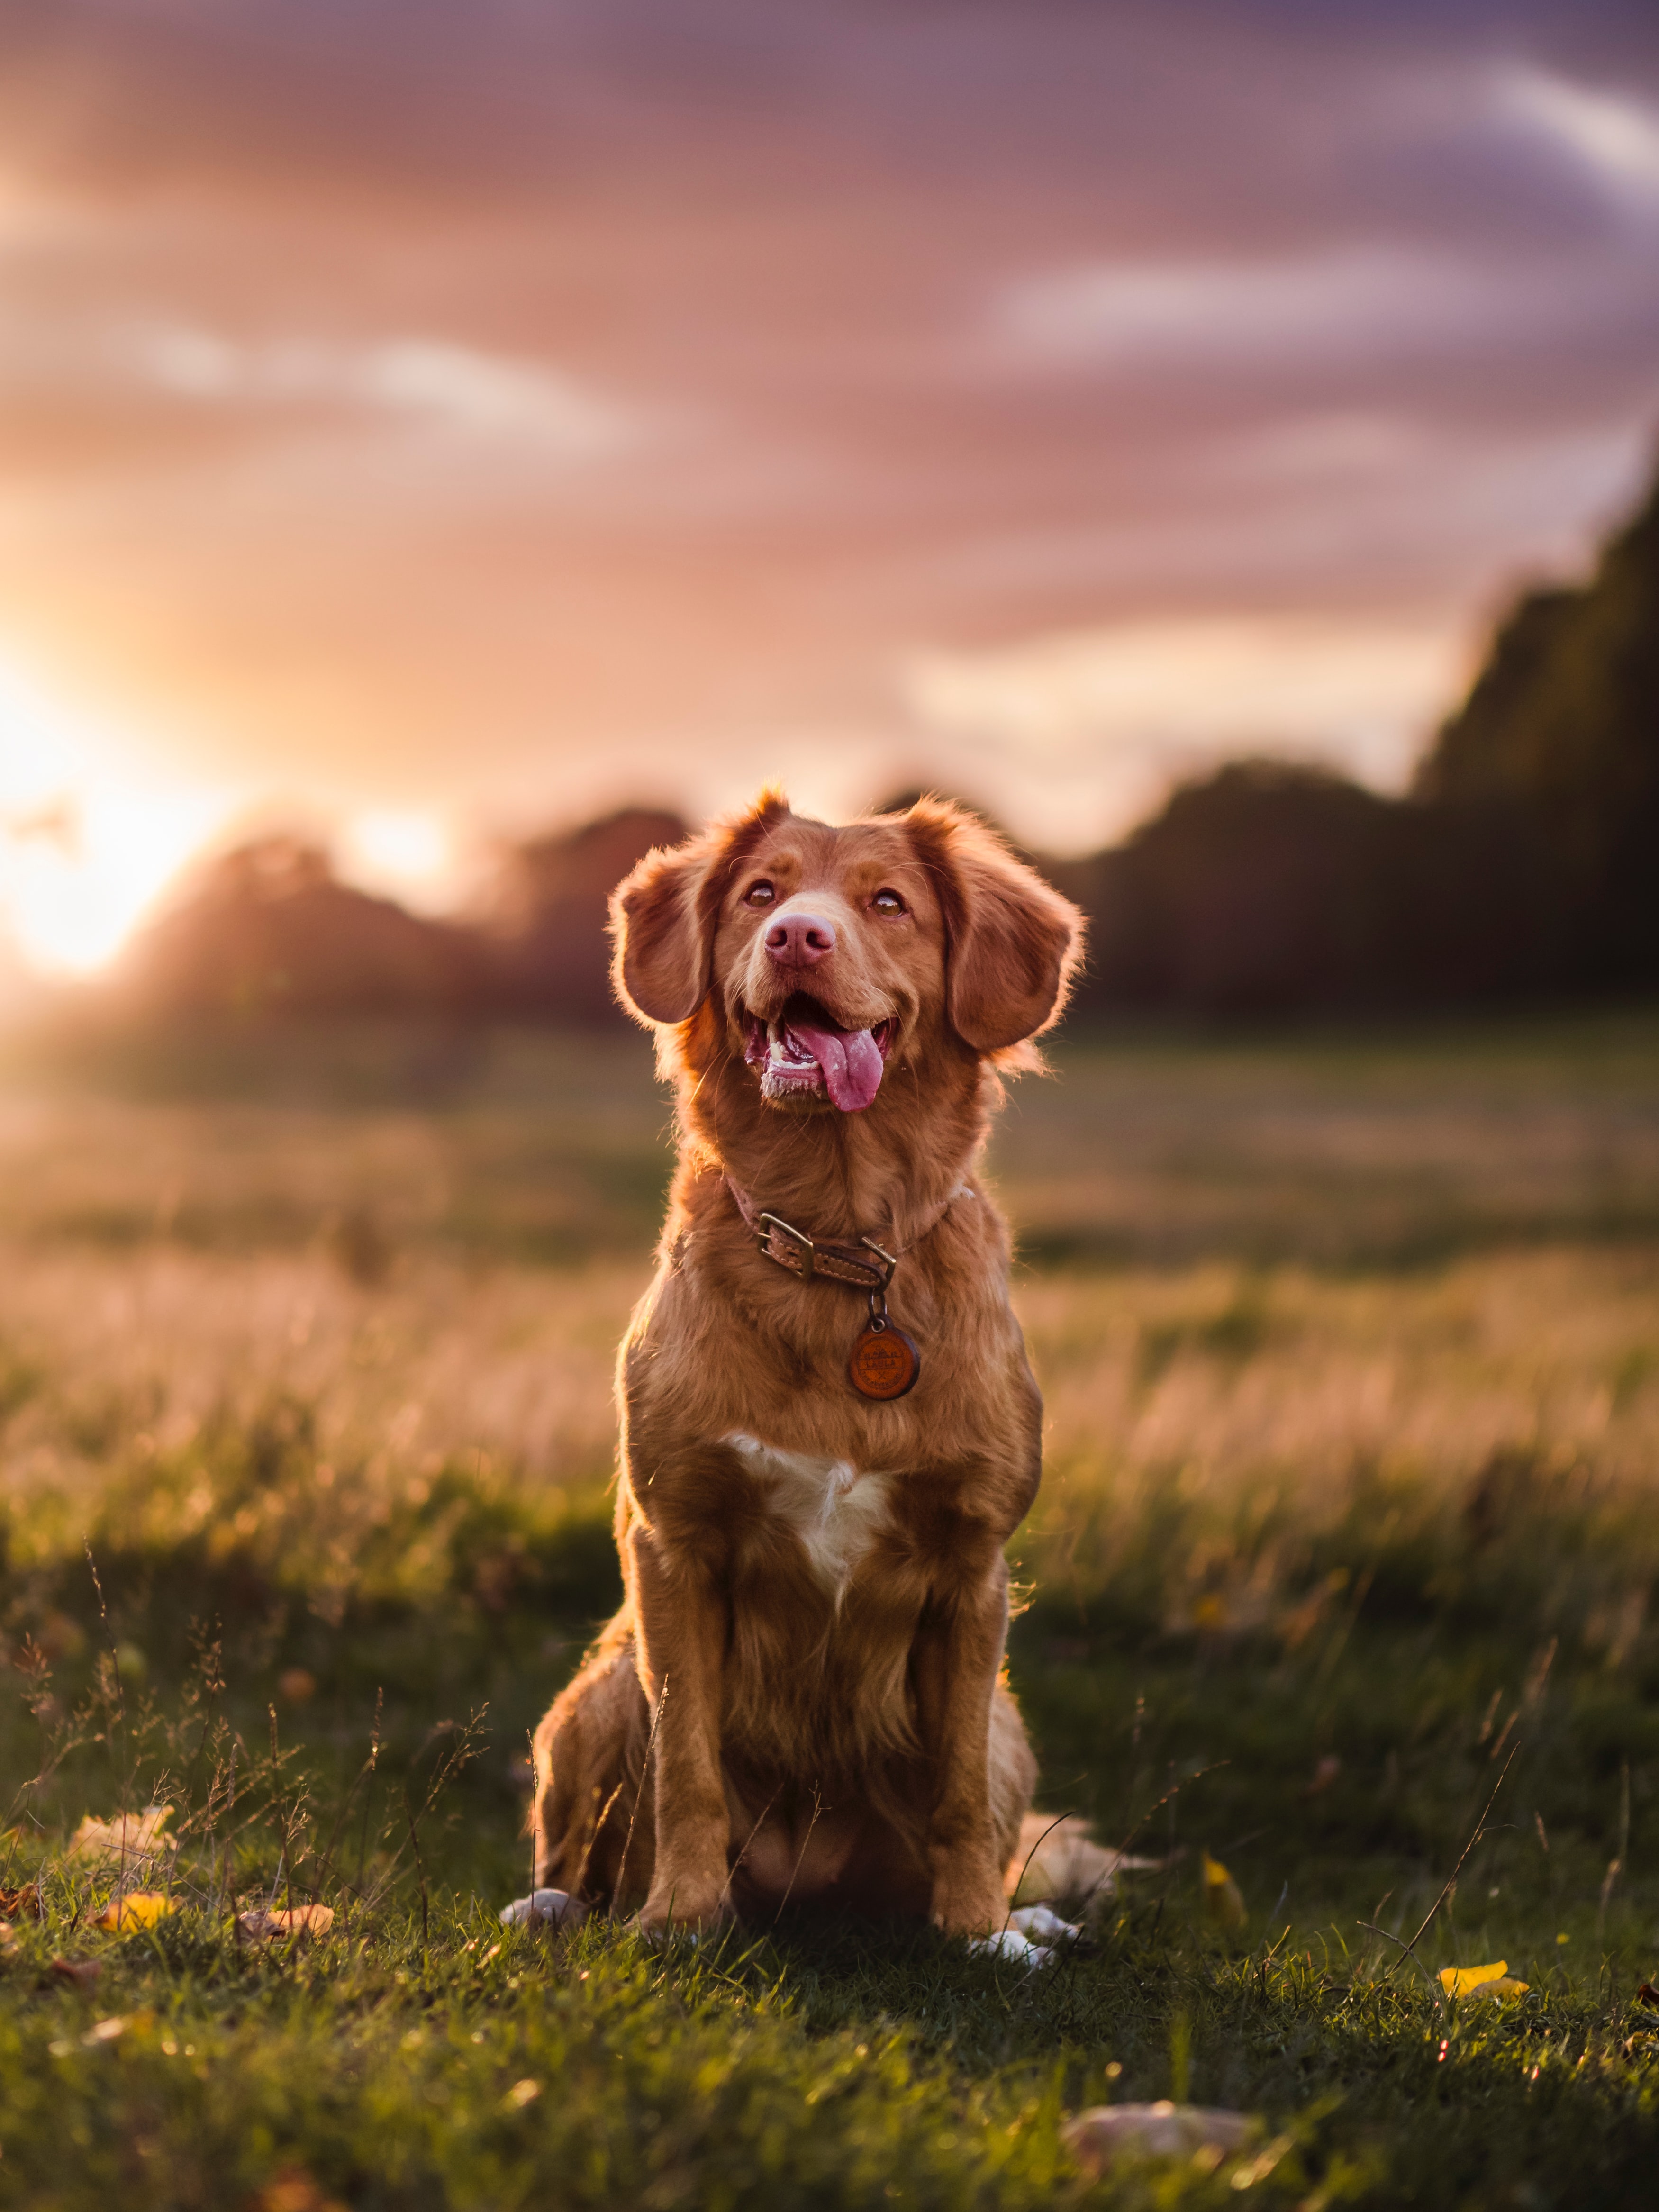 Wallpapers golden retriever cute protruding tongue on the desktop